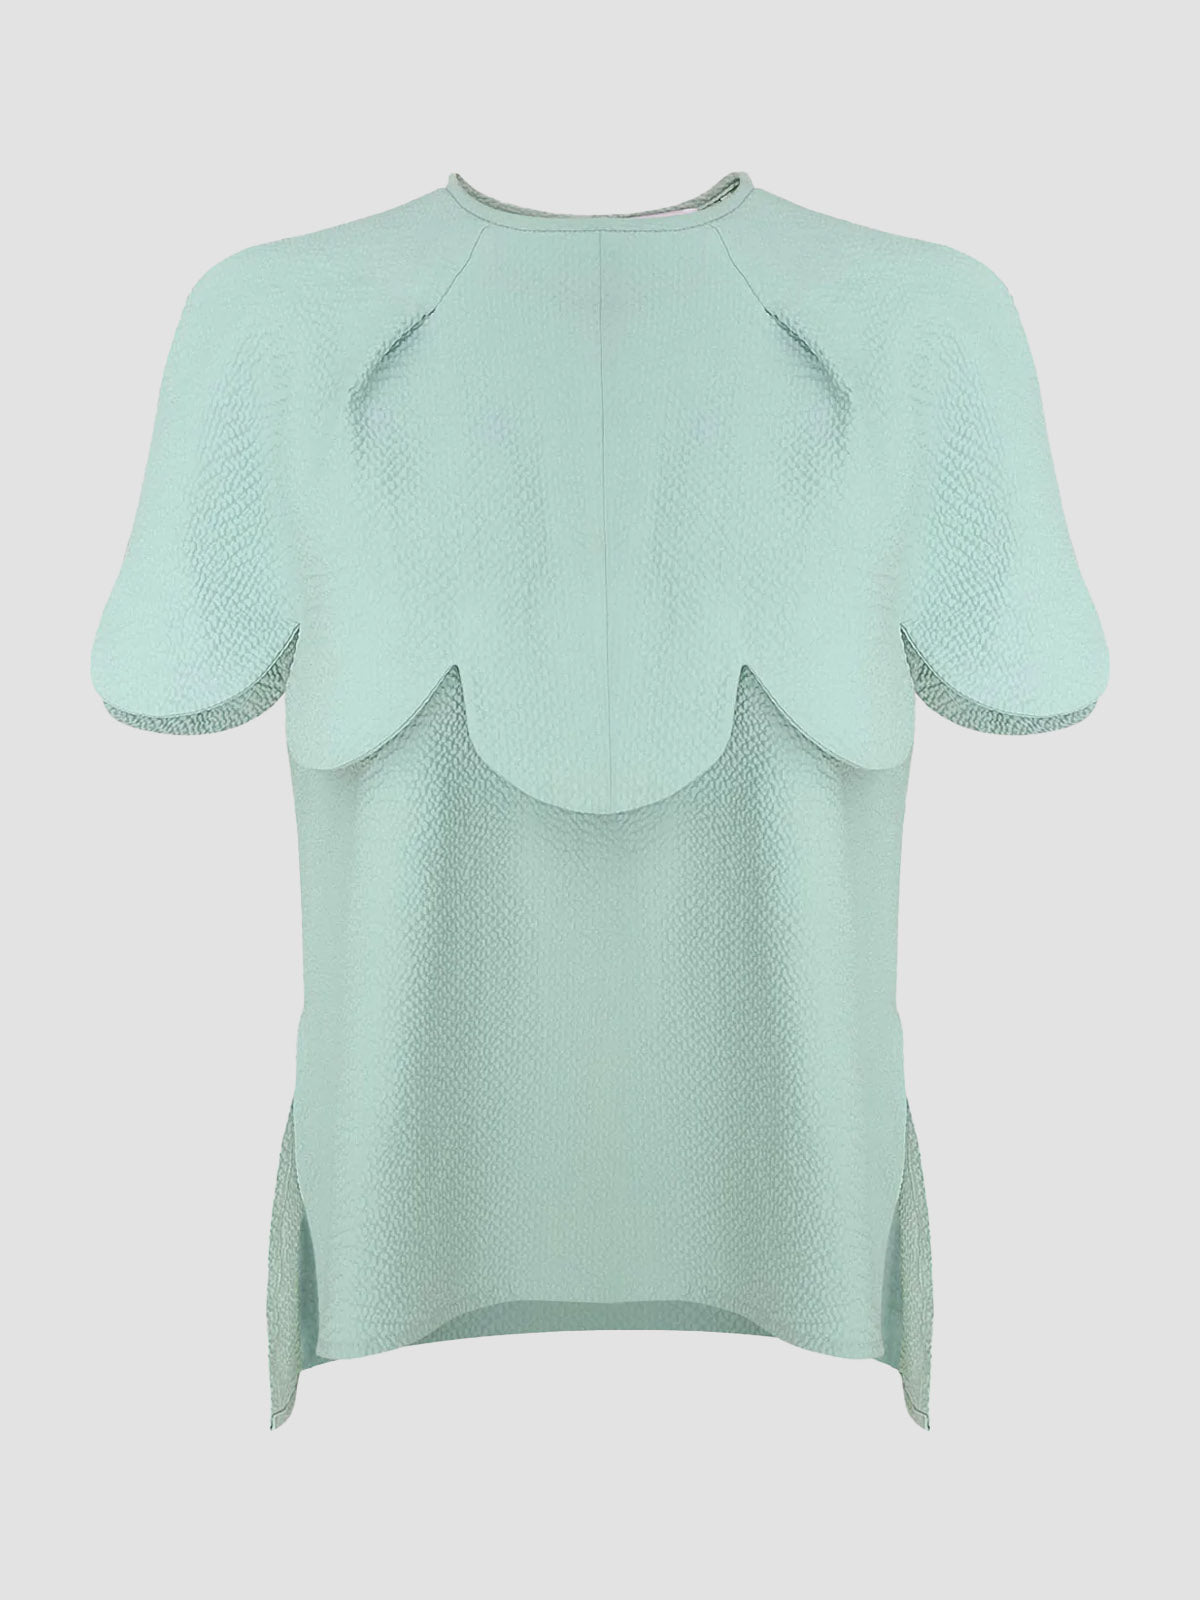 Beamish mint green short-sleeved top